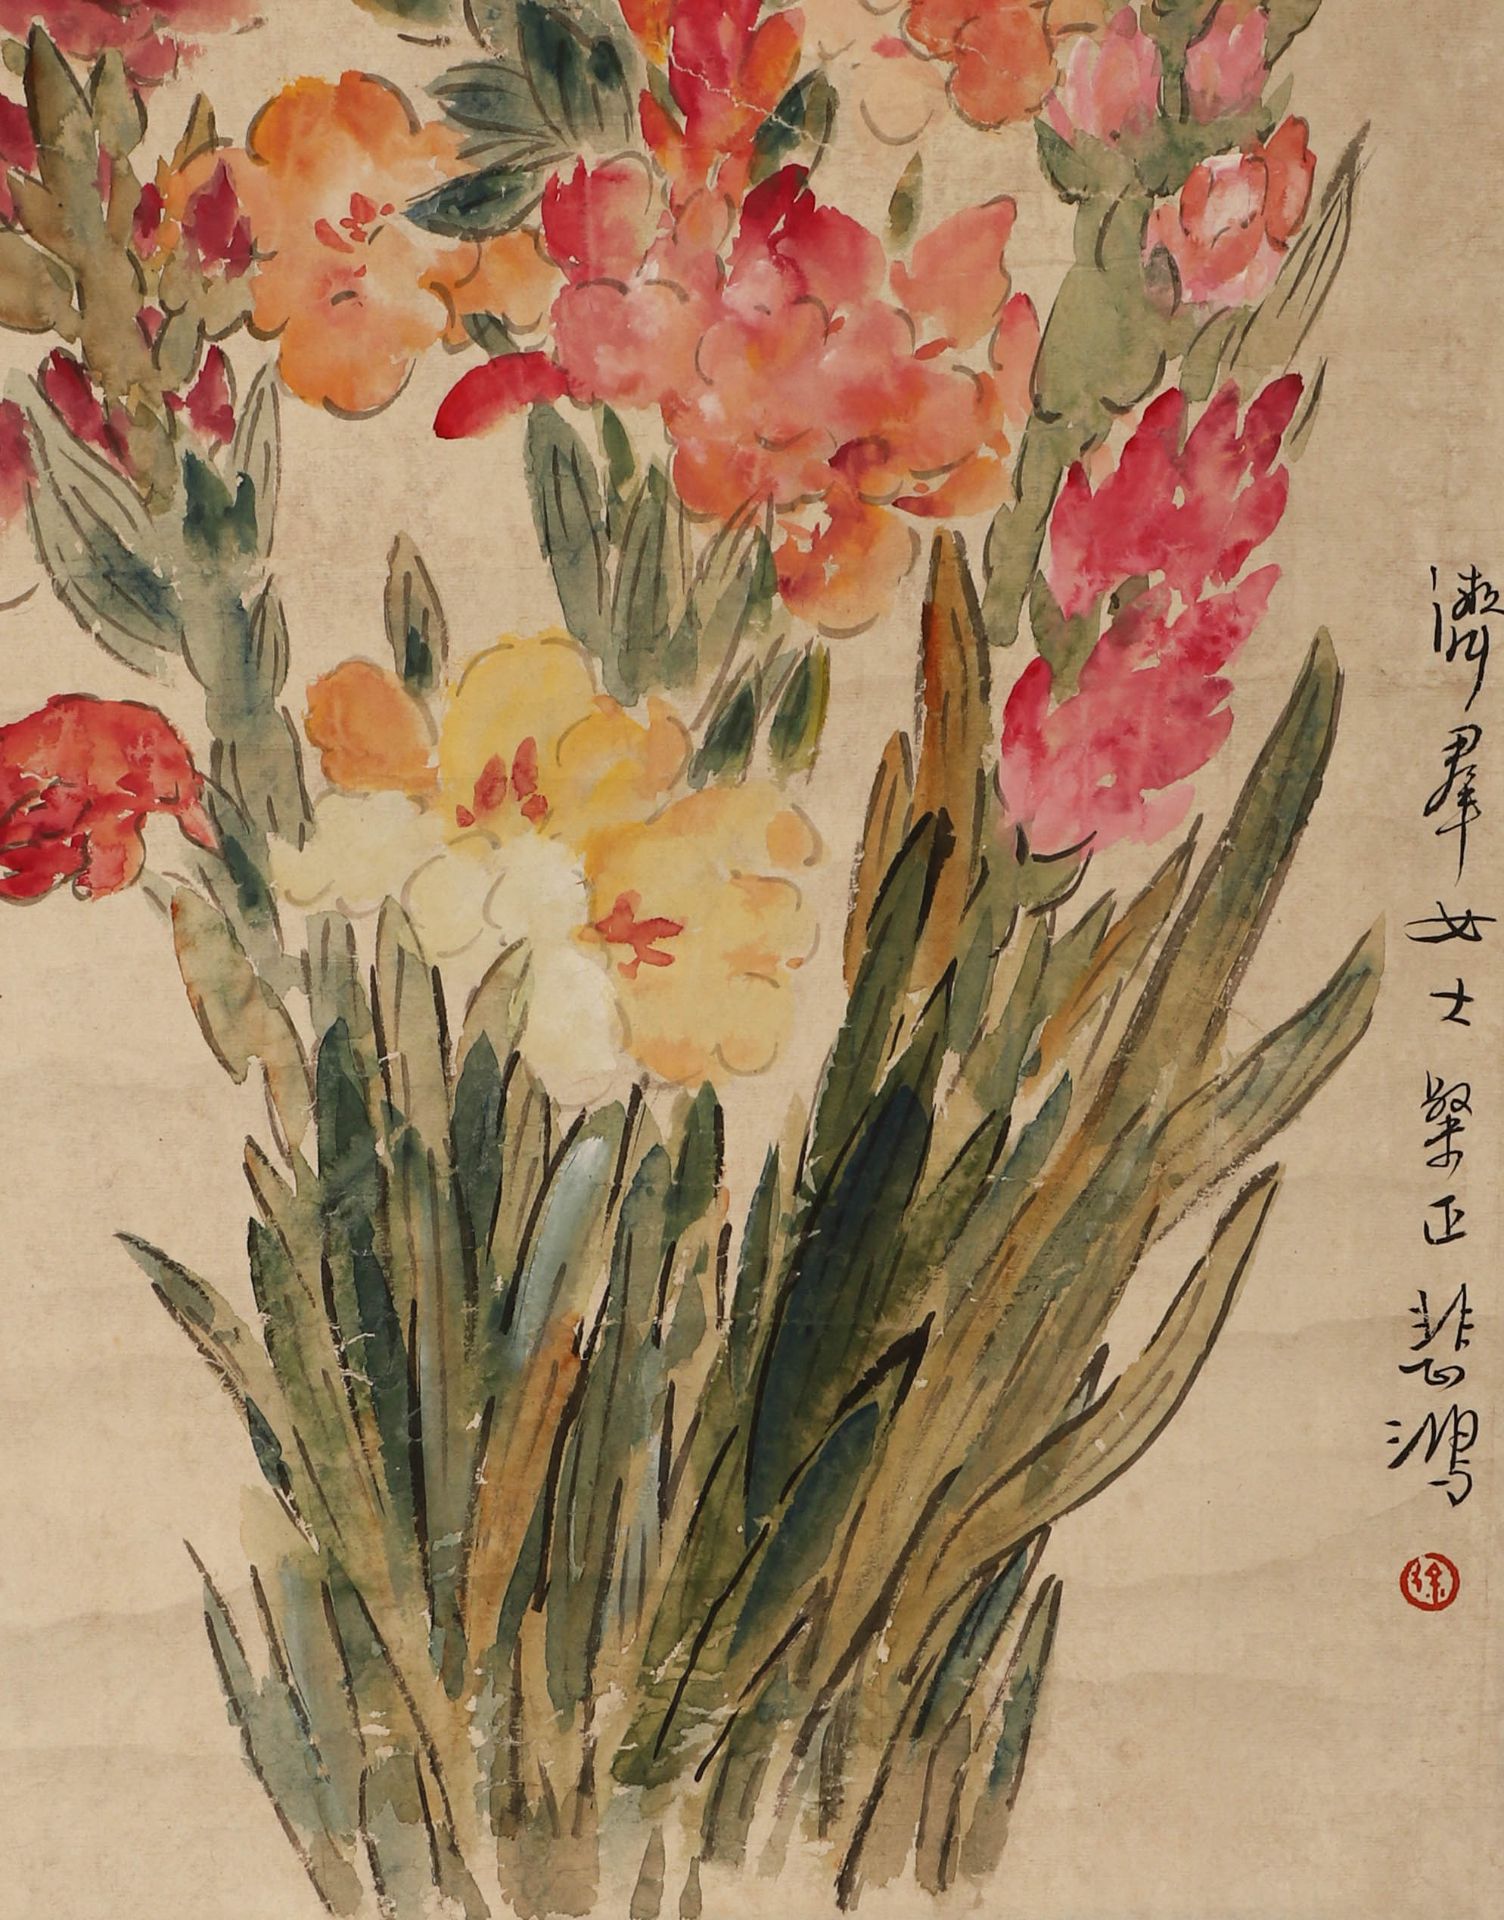 Flowers painting on paper by Xu Beihong  - Image 17 of 22